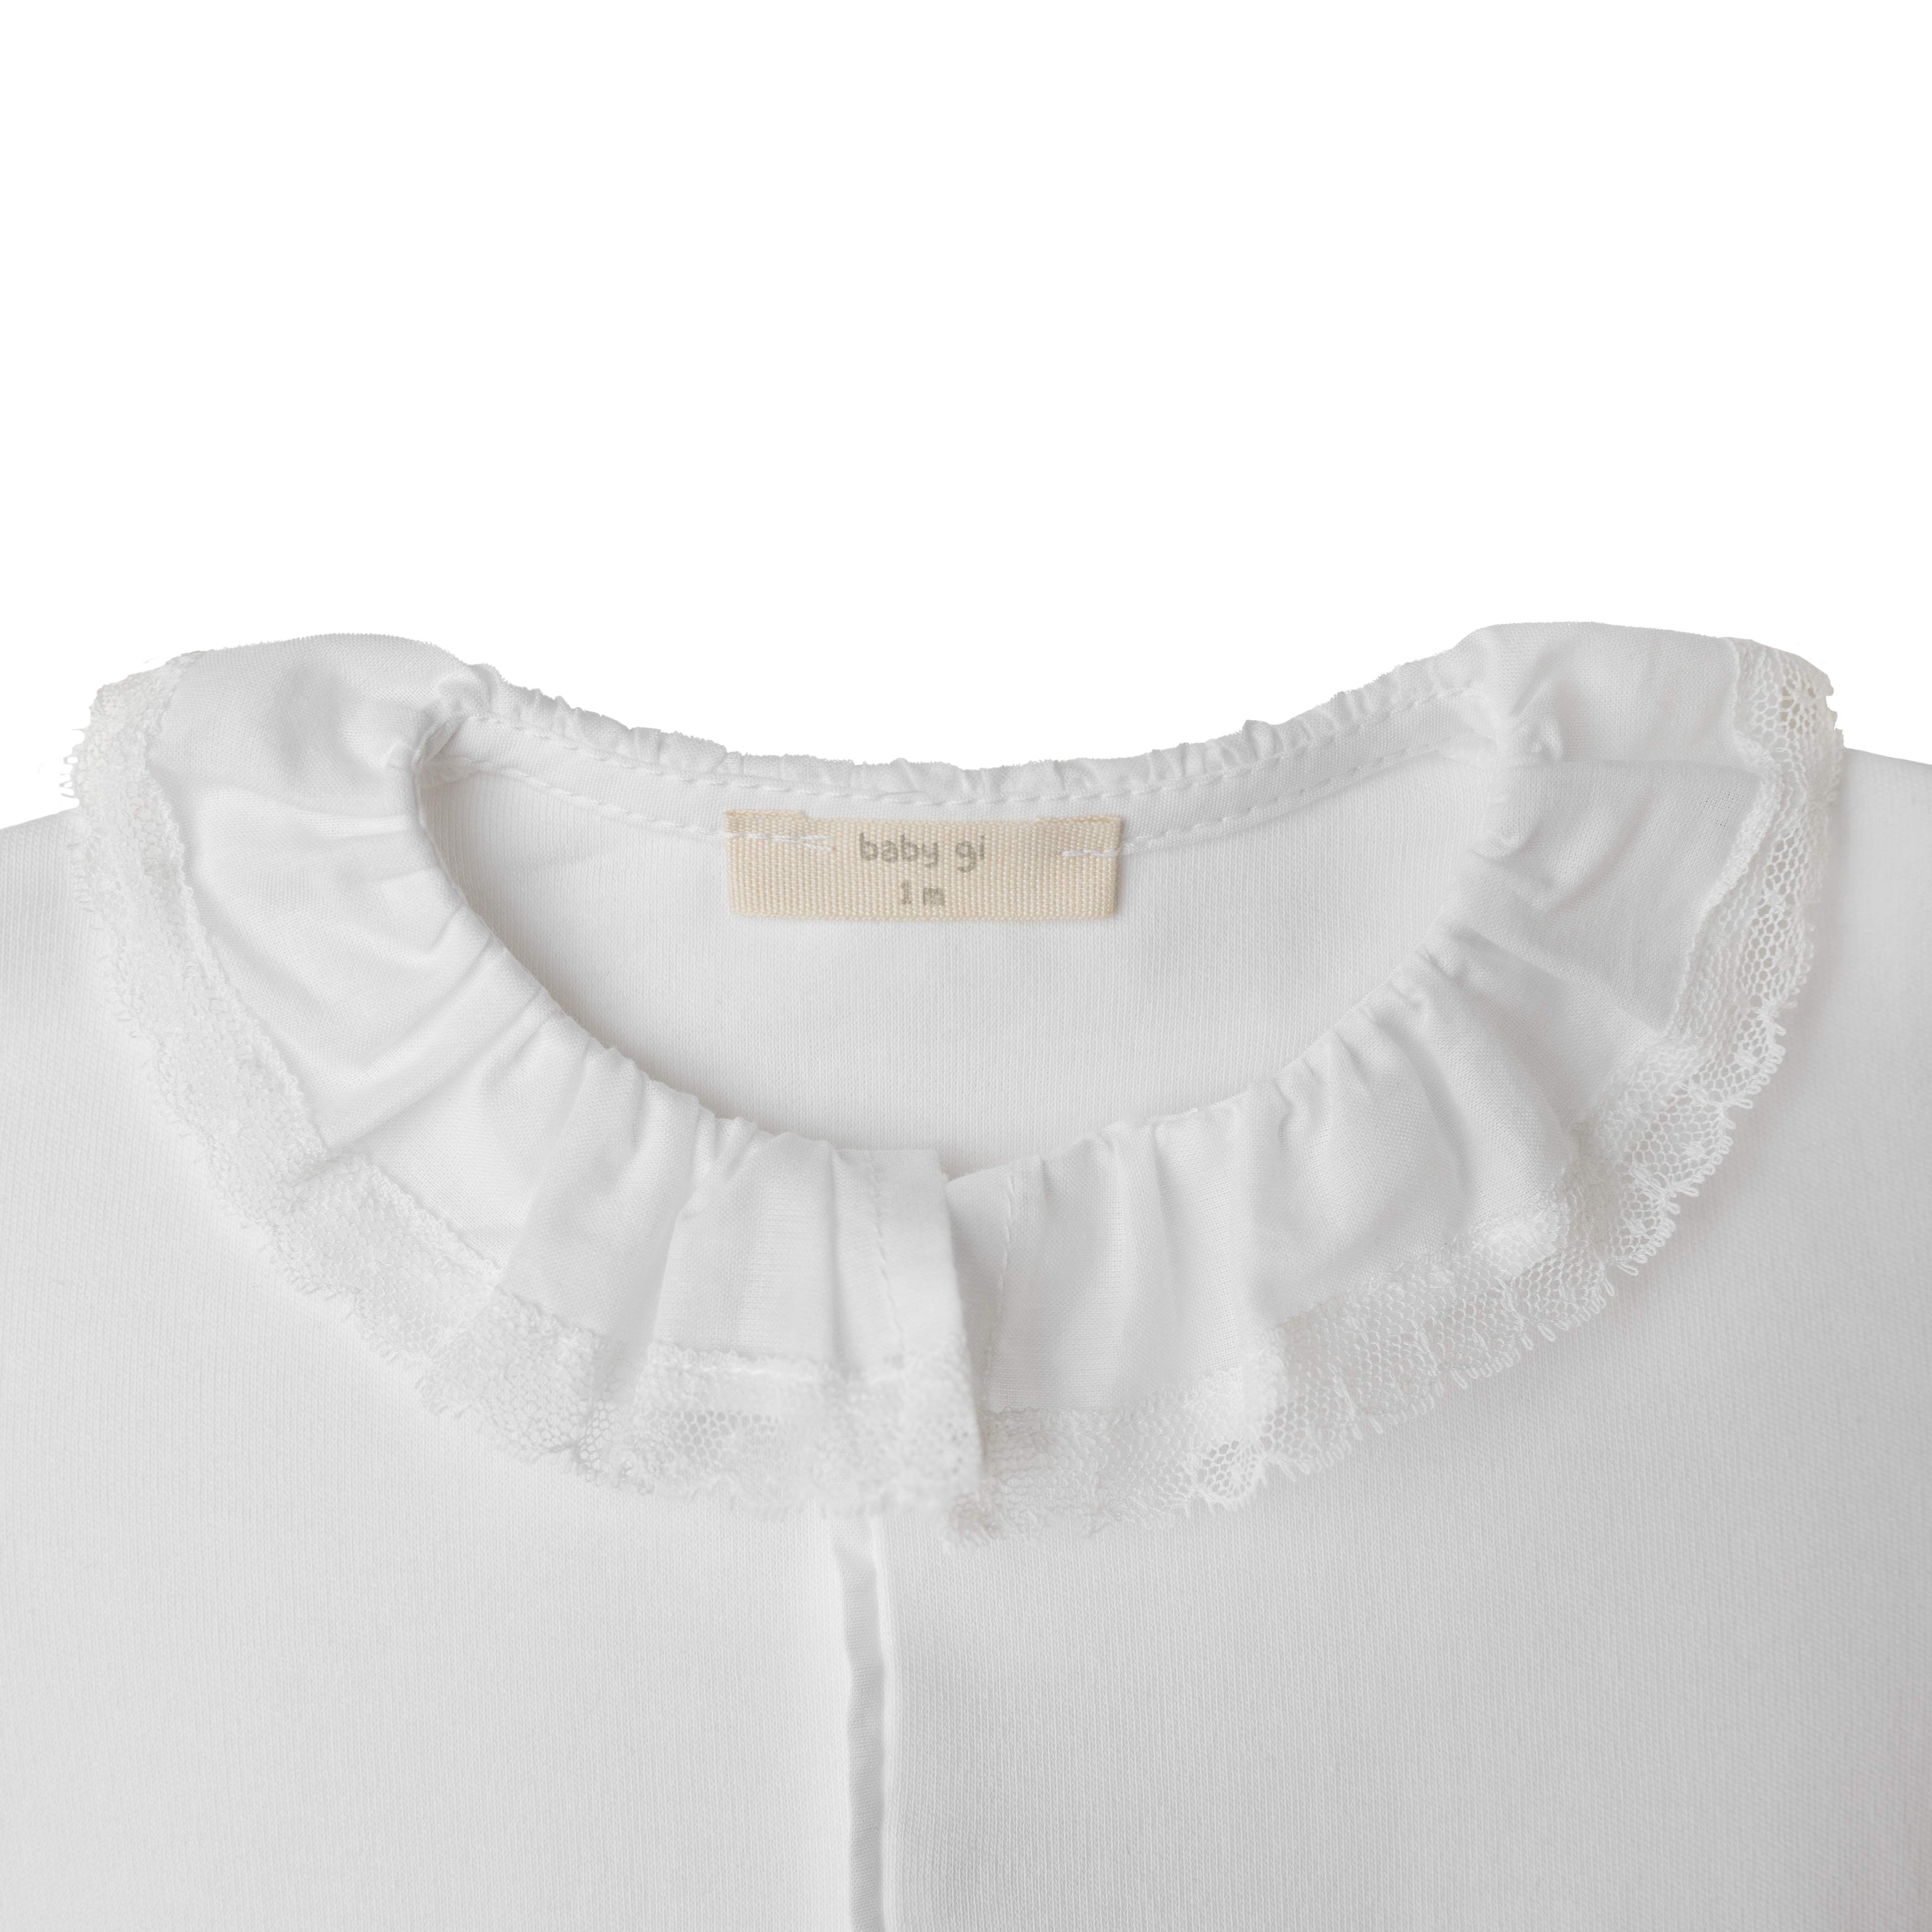 Babygrow - Frill Collar with lace trim